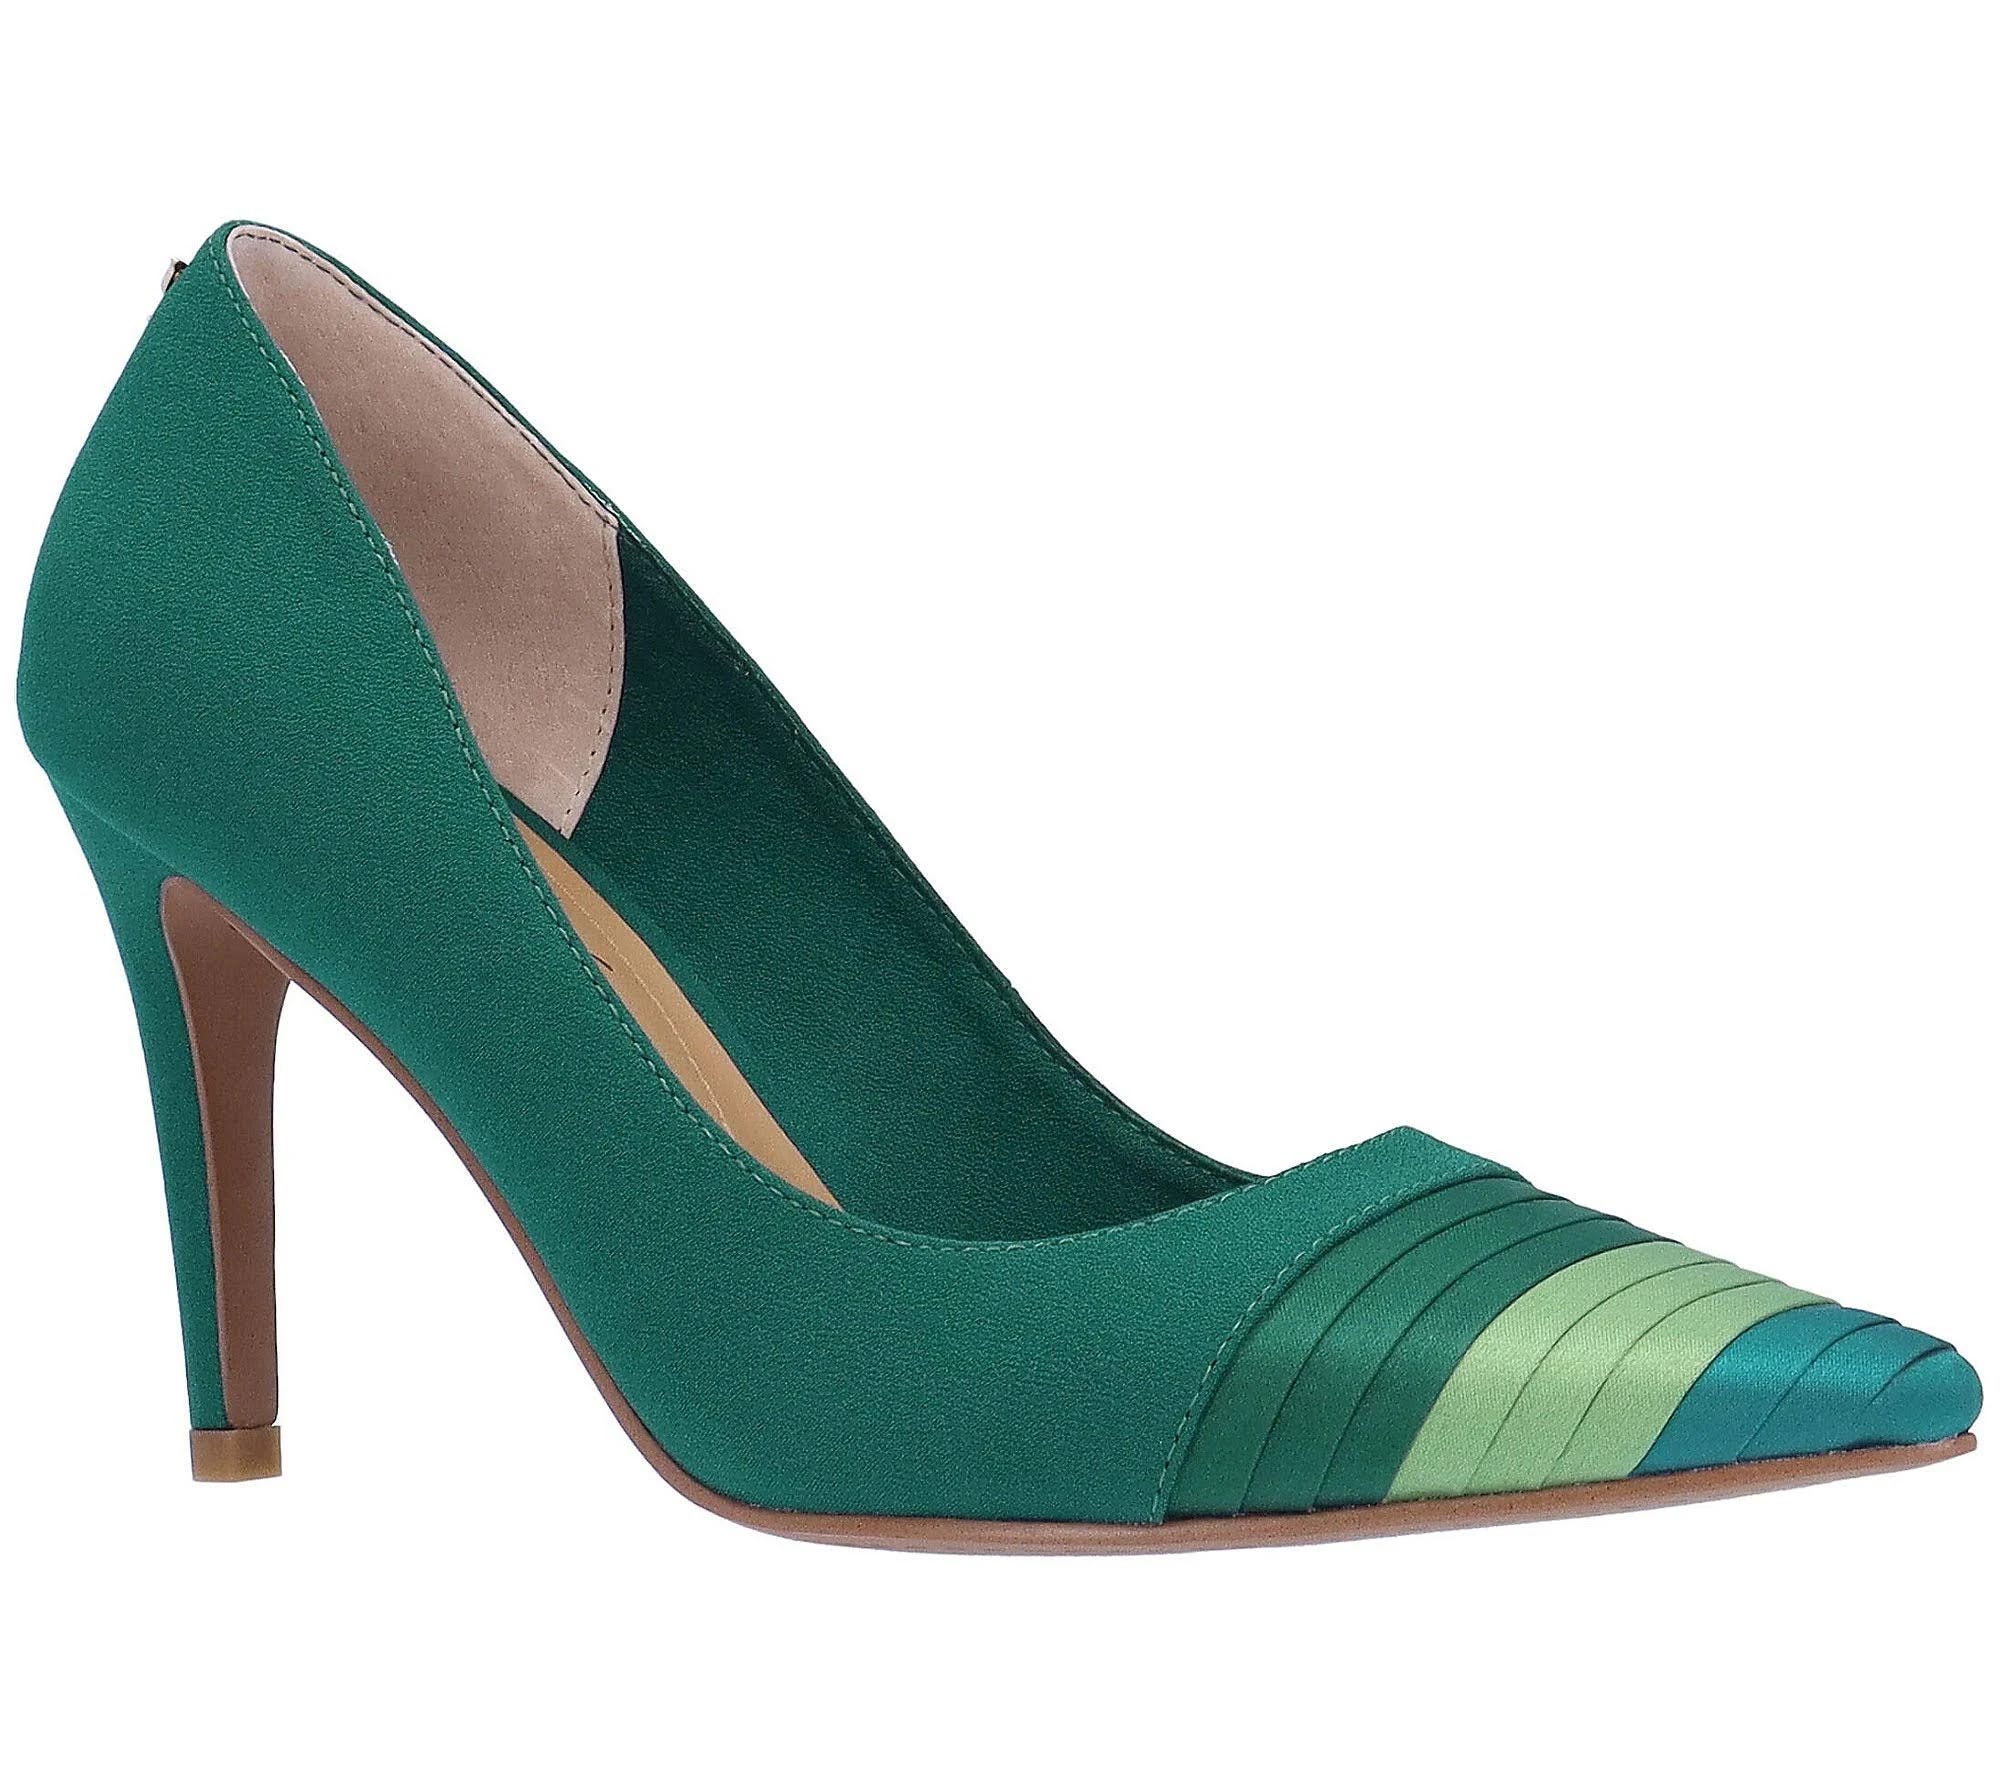 Emerald Green Pump Shoes for Women: Fashionable and Comfortable Design | Image